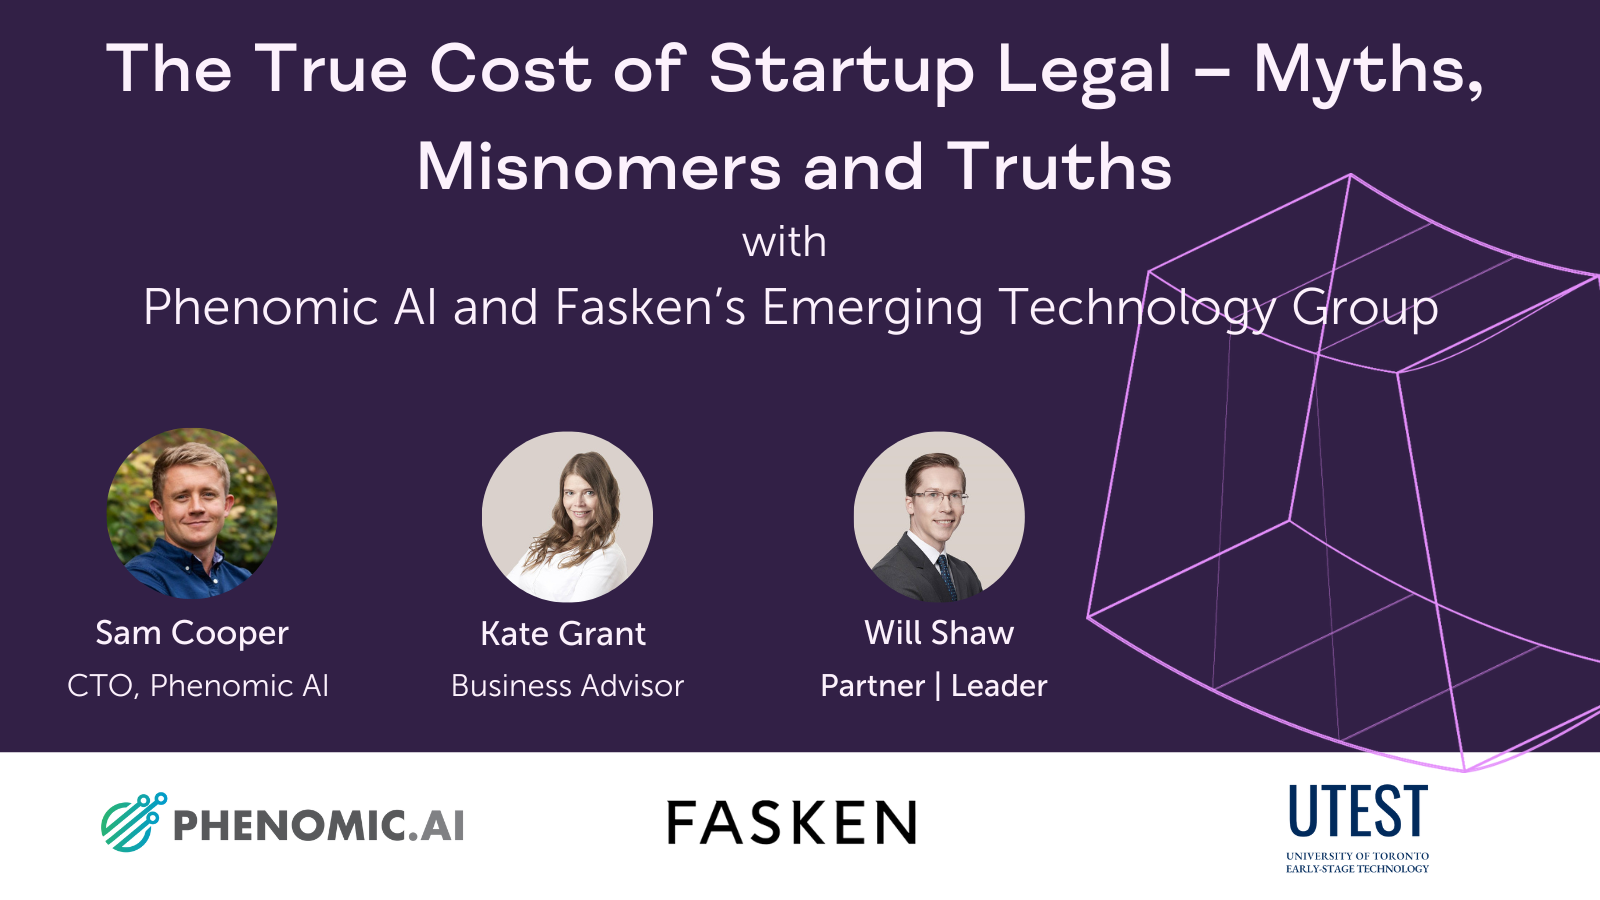 The True Cost of Startup Legal – Myths, Misnomers and Truths